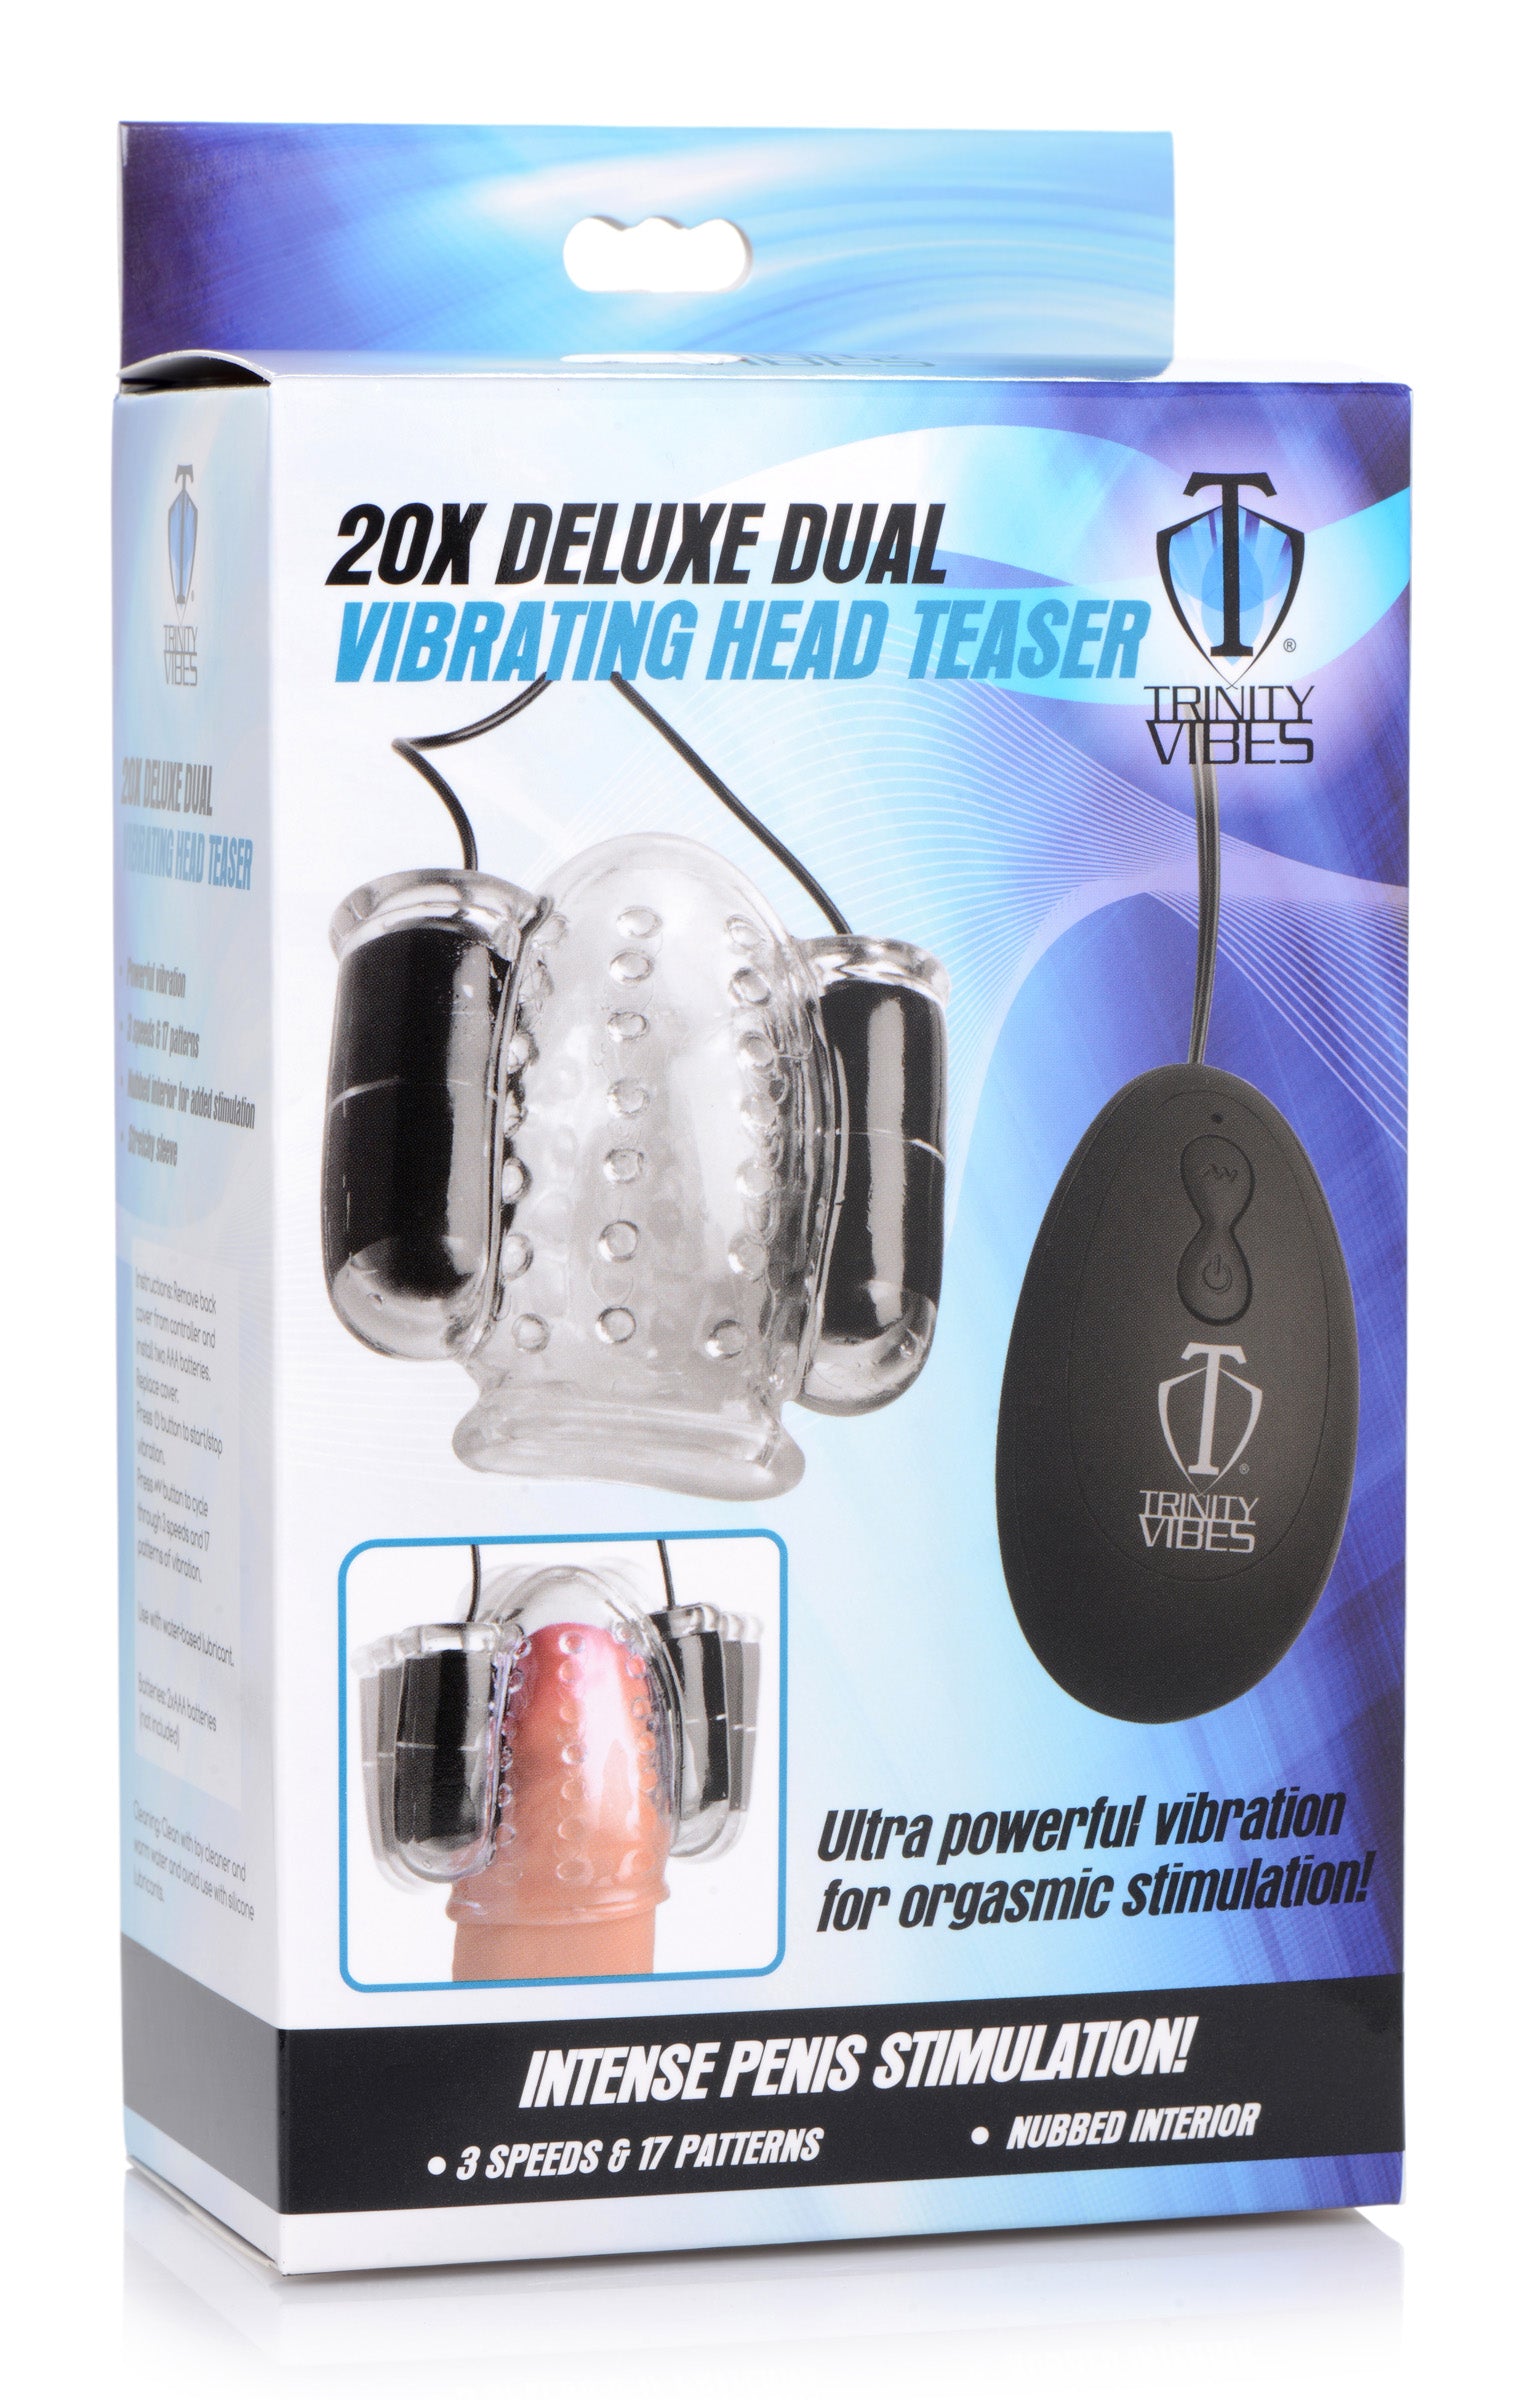 20X Deluxe Dual Vibrating Head Teaser